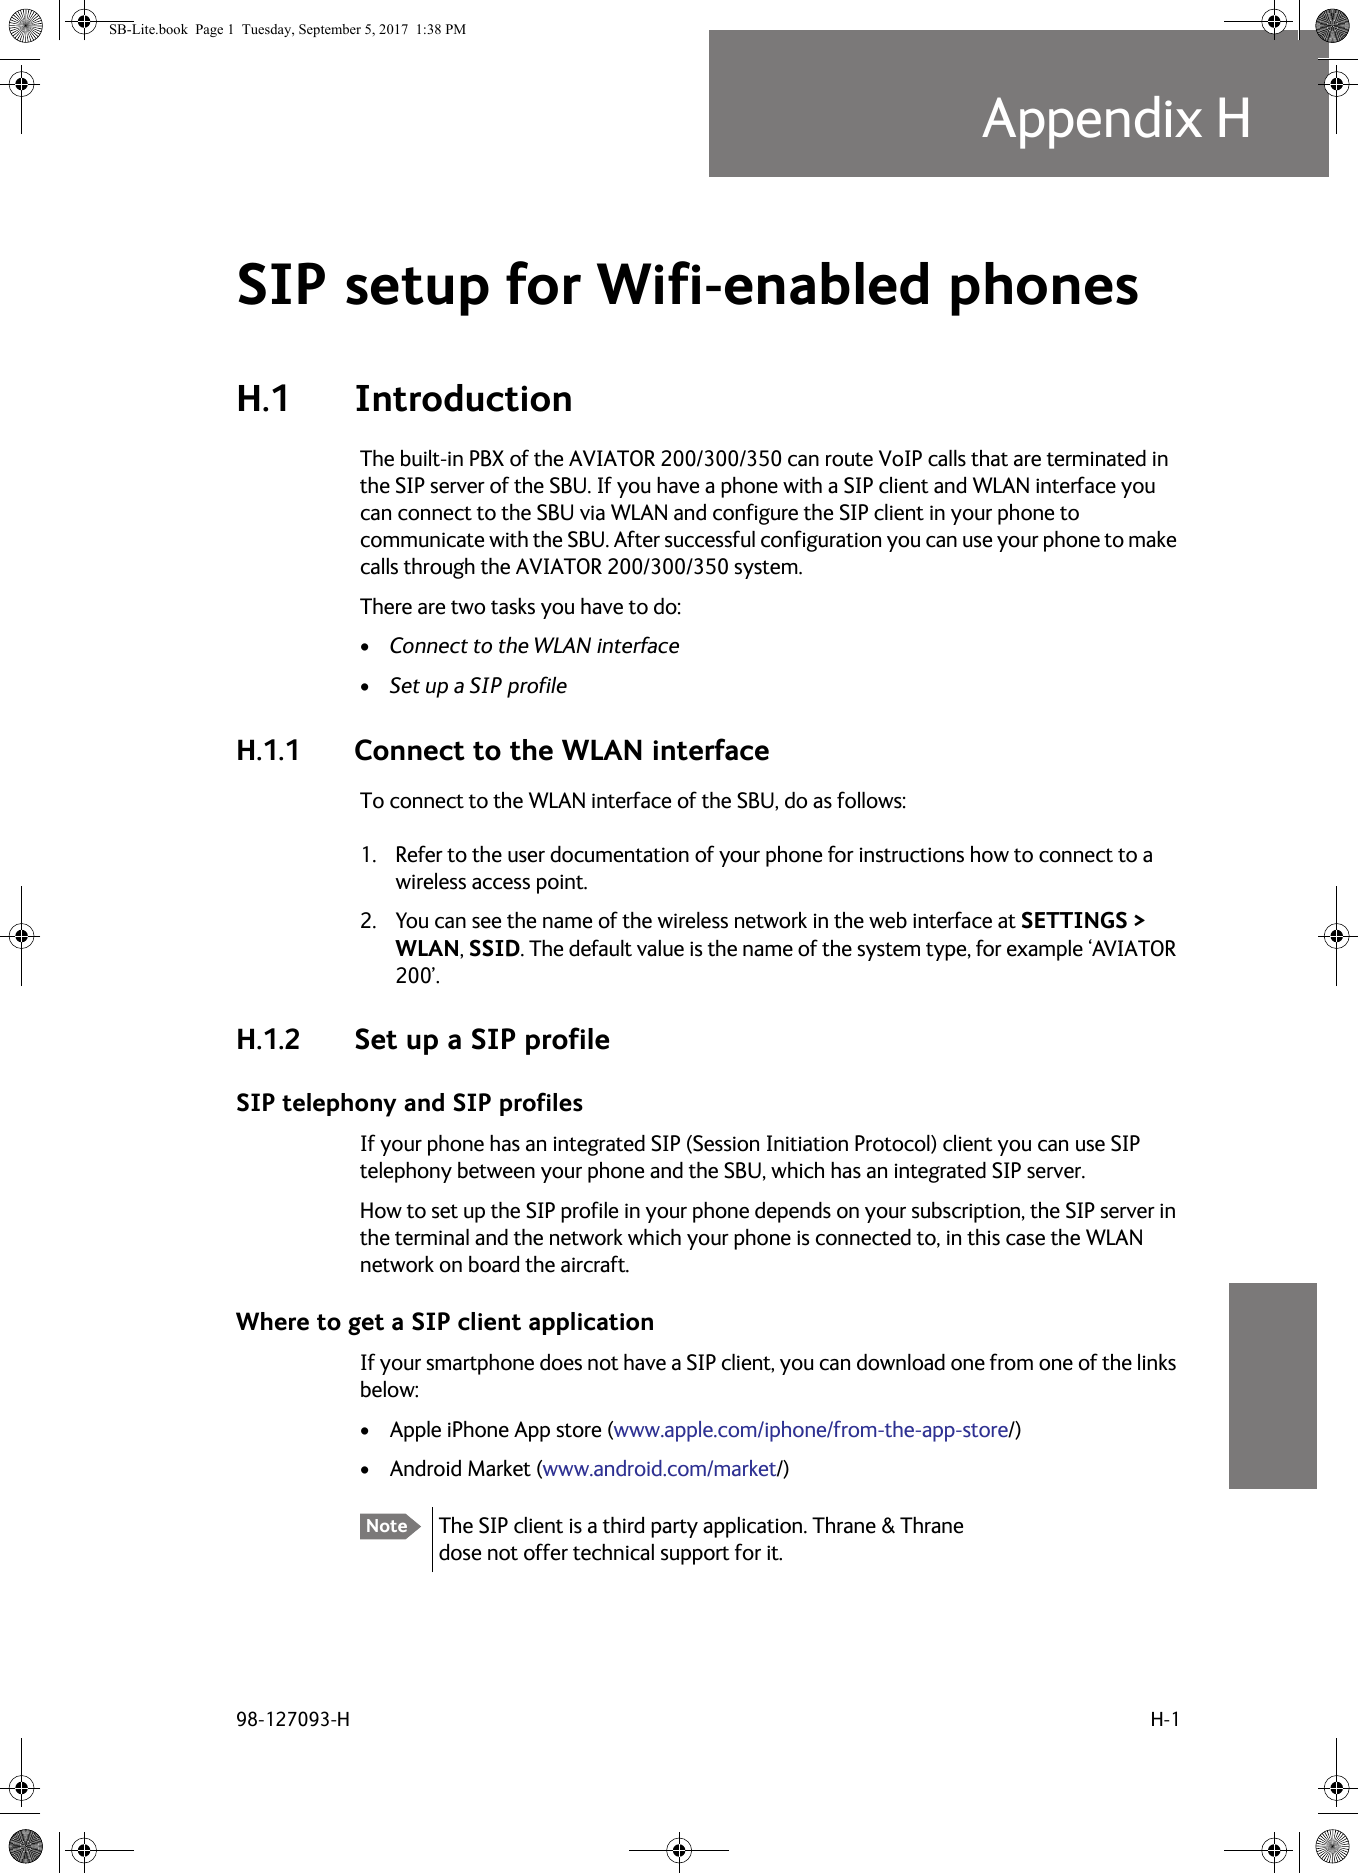 98-127093-H H-1Appendix HHHHHSIP setup for Wifi-enabled phones HH.1 IntroductionThe built-in PBX of the AVIATOR  200/300/350 can route VoIP calls that are terminated in the SIP server of the SBU. If you have a phone with a SIP client and WLAN interface you can connect to the SBU via WLAN and configure the SIP client in your phone to communicate with the SBU. After successful configuration you can use your phone to make calls through the AVIATOR  200/300/350 system.There are two tasks you have to do:•Connect to the WLAN interface•Set up a SIP profileH.1.1 Connect to the WLAN interfaceTo connect to the WLAN interface of the SBU, do as follows:1. Refer to the user documentation of your phone for instructions how to connect to a wireless access point.2. You can see the name of the wireless network in the web interface at SETTINGS &gt; WLAN, SSID. The default value is the name of the system type, for example ‘AVIATOR 200’.H.1.2 Set up a SIP profileSIP telephony and SIP profilesIf your phone has an integrated SIP (Session Initiation Protocol) client you can use SIP telephony between your phone and the SBU, which has an integrated SIP server.How to set up the SIP profile in your phone depends on your subscription, the SIP server in the terminal and the network which your phone is connected to, in this case the WLAN network on board the aircraft.Where to get a SIP client applicationIf your smartphone does not have a SIP client, you can download one from one of the links below: • Apple iPhone App store (www.apple.com/iphone/from-the-app-store/)• Android Market (www.android.com/market/)Note The SIP client is a third party application. Thrane &amp; Thrane dose not offer technical support for it.SB-Lite.book  Page 1  Tuesday, September 5, 2017  1:38 PM